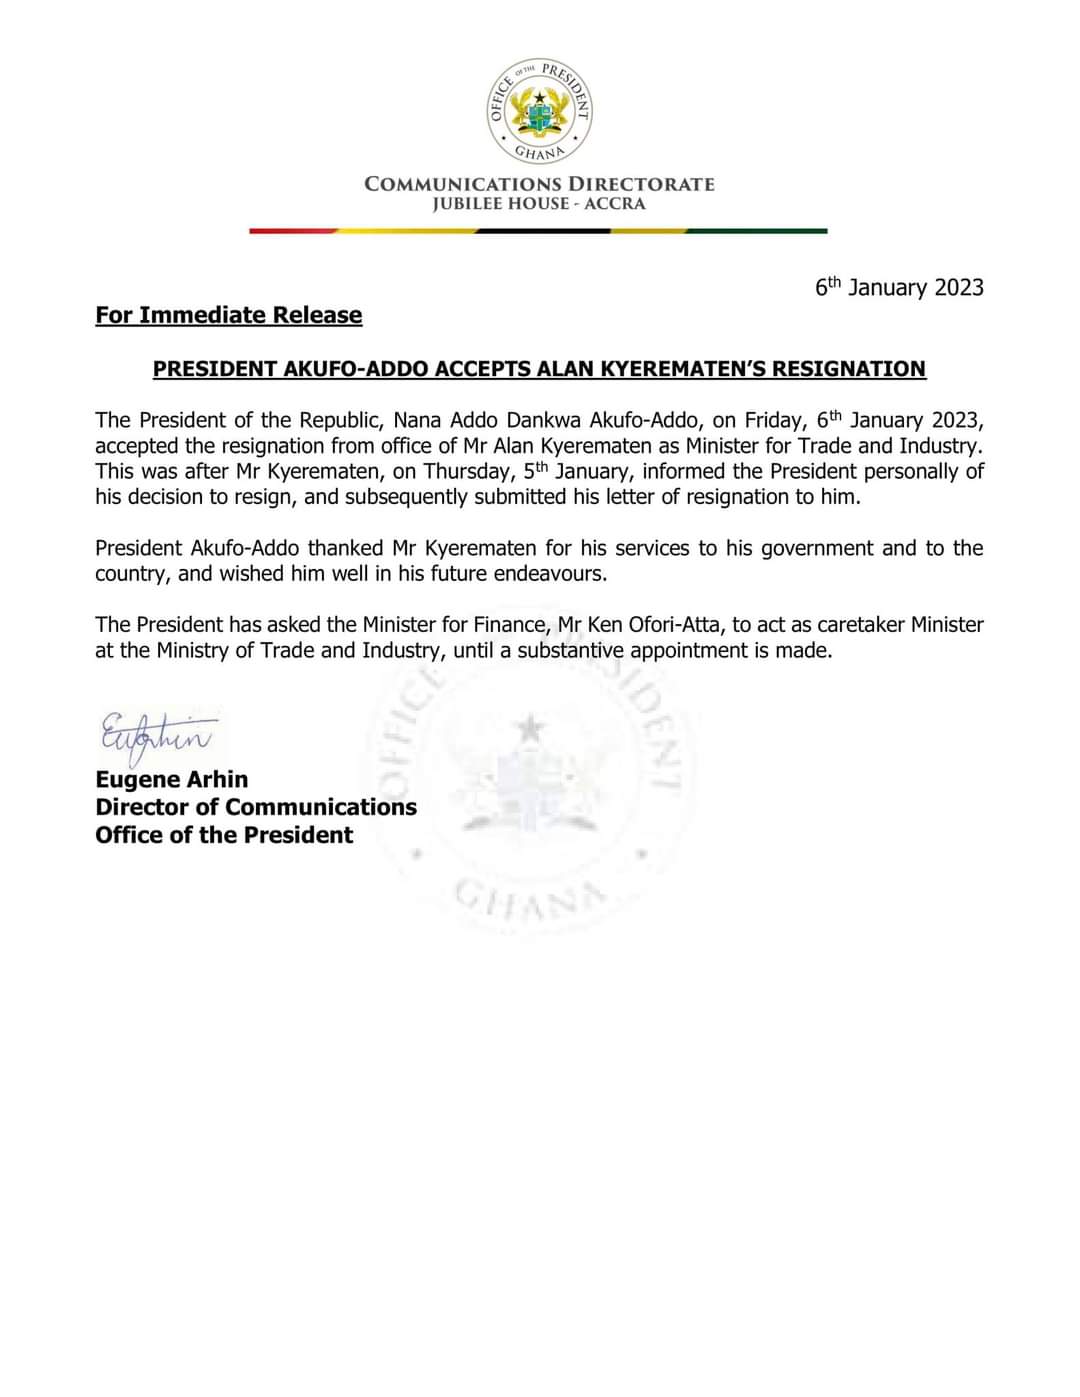 This is why Alan resigned from NPP to contest presidency as an